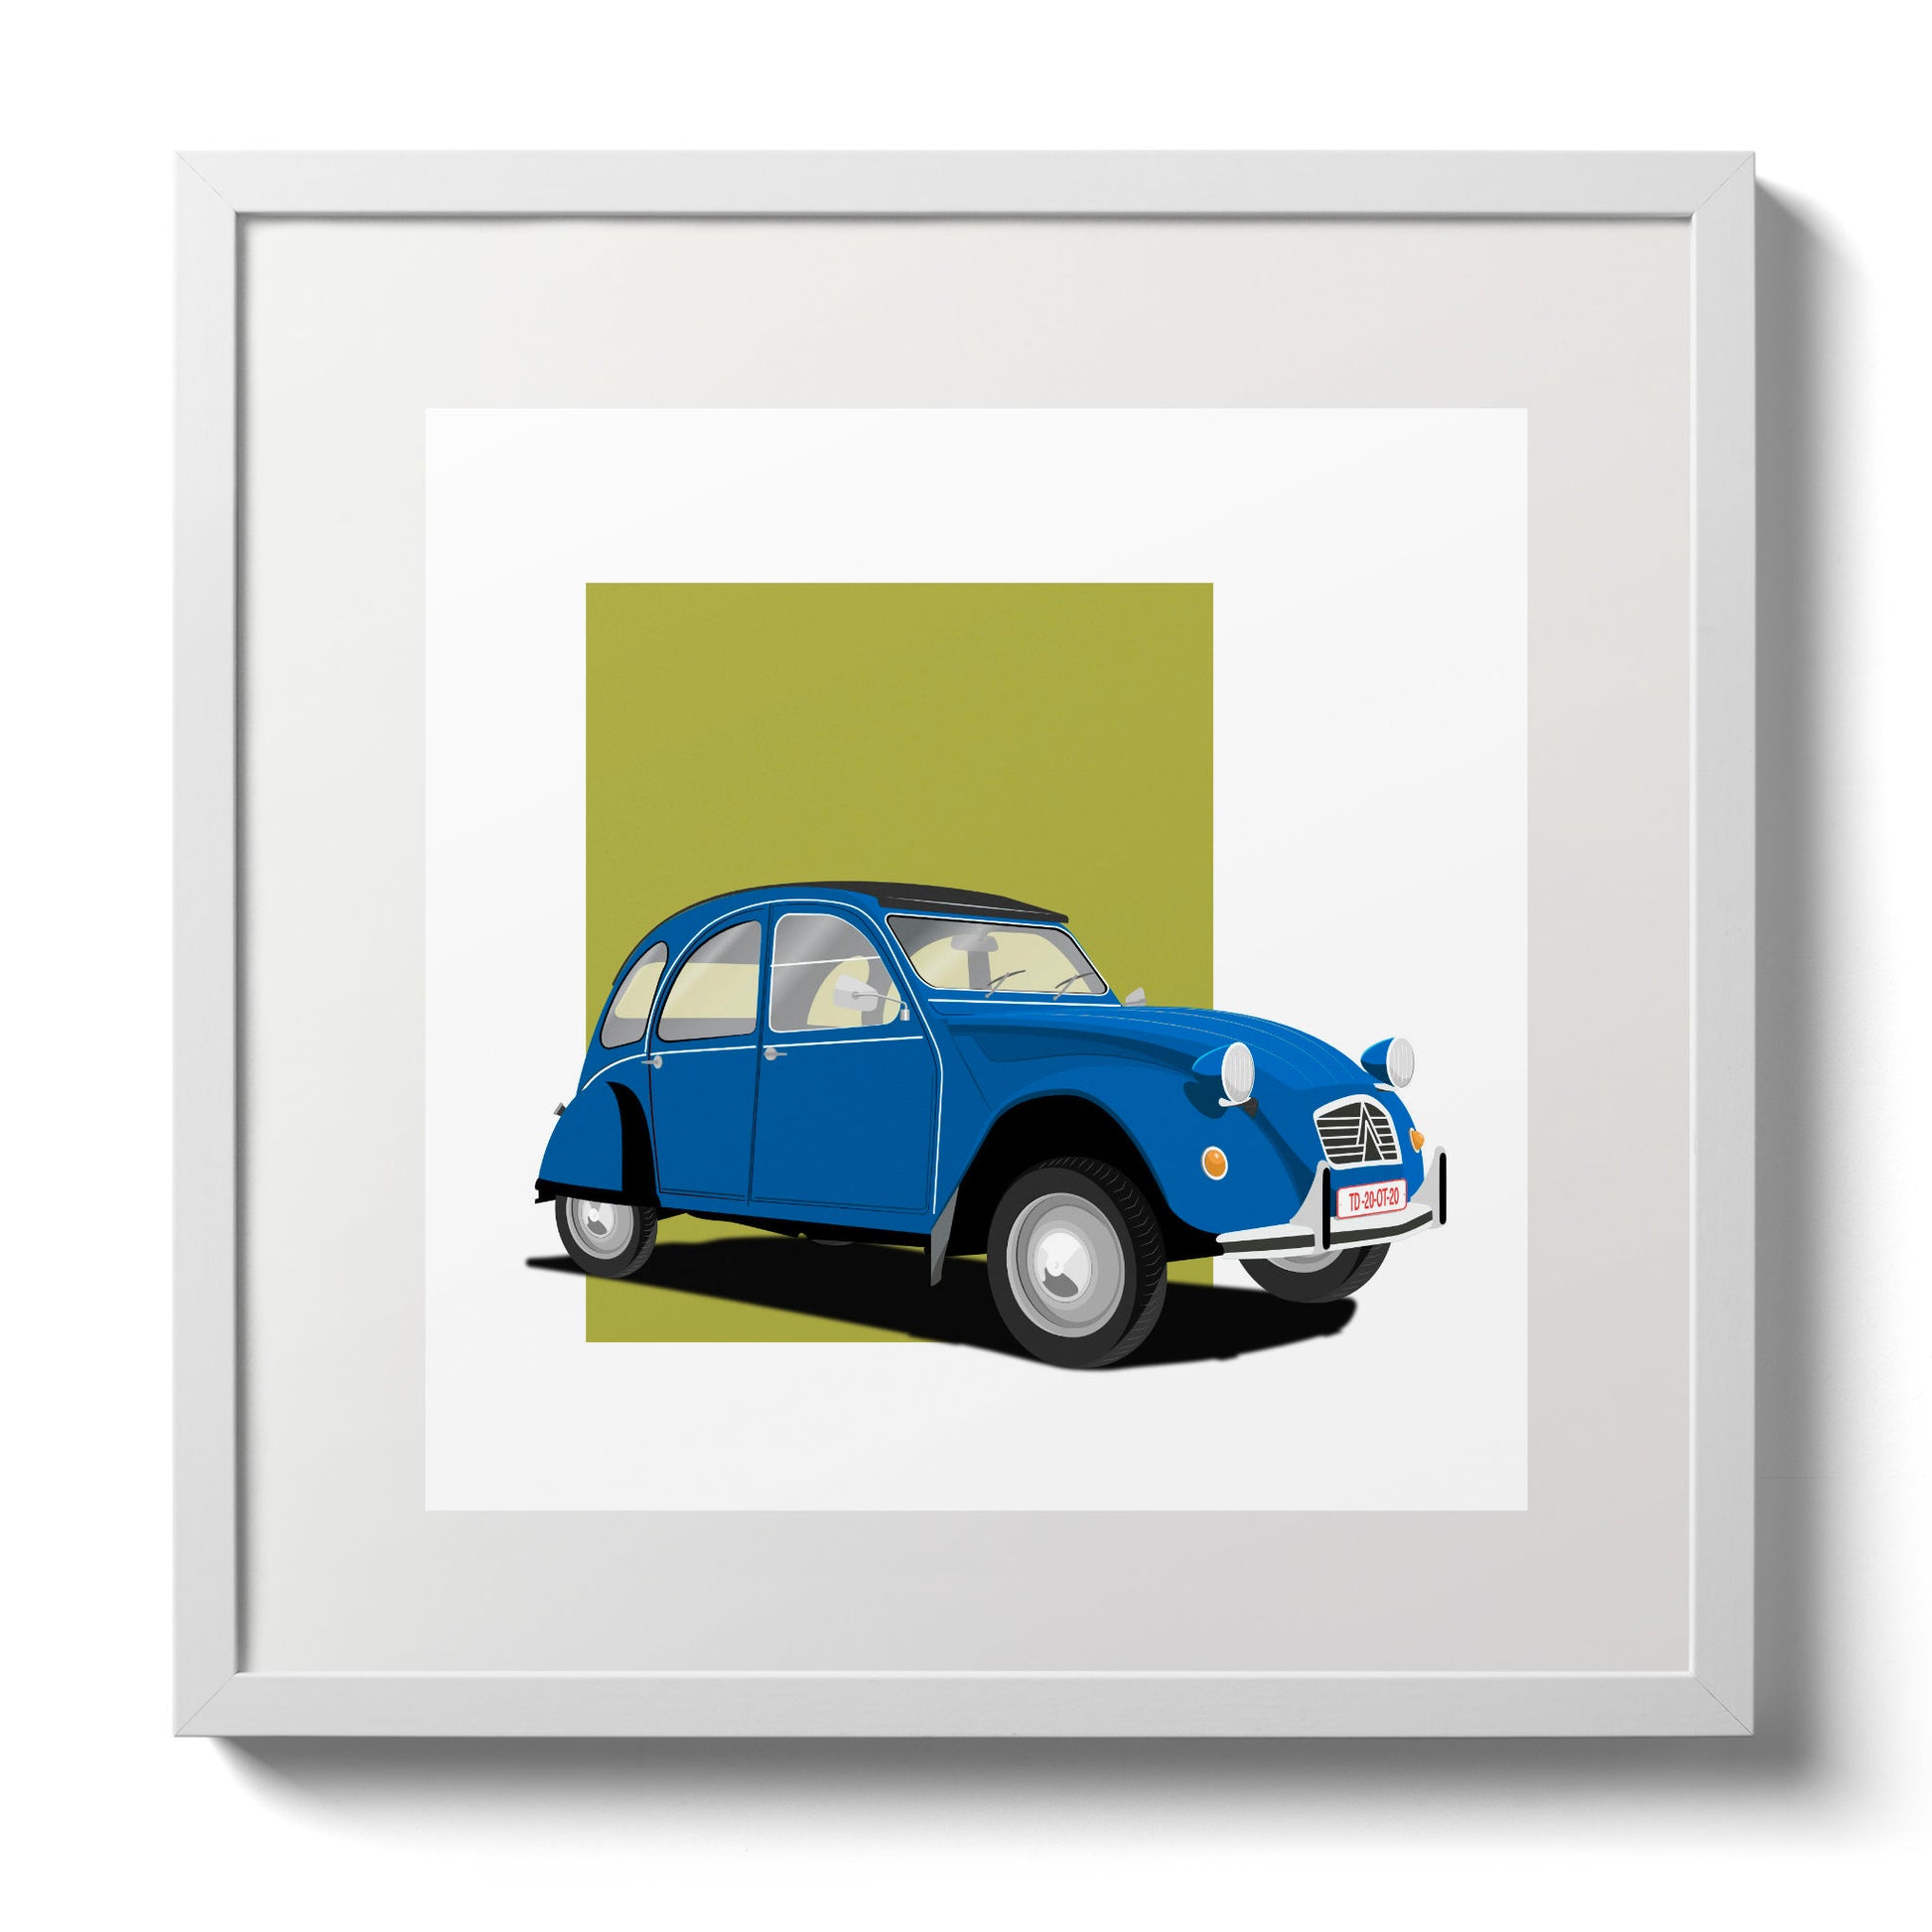 Illustration of a blue Citroën 2CV, in a white frame and measuring 30 by 30 cm